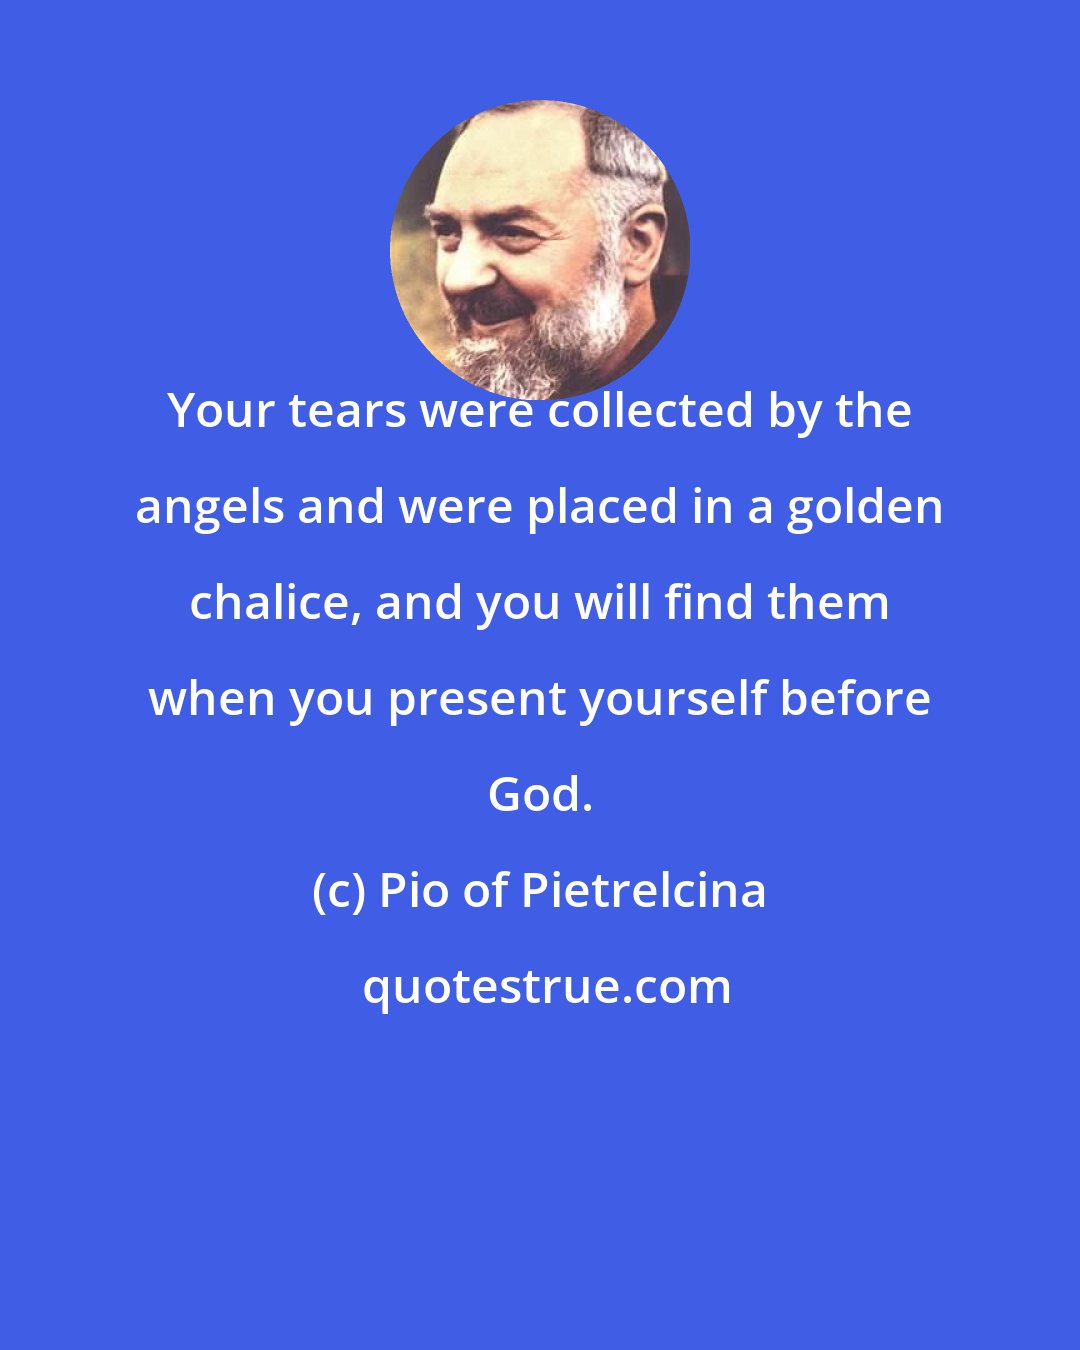 Pio of Pietrelcina: Your tears were collected by the angels and were placed in a golden chalice, and you will find them when you present yourself before God.